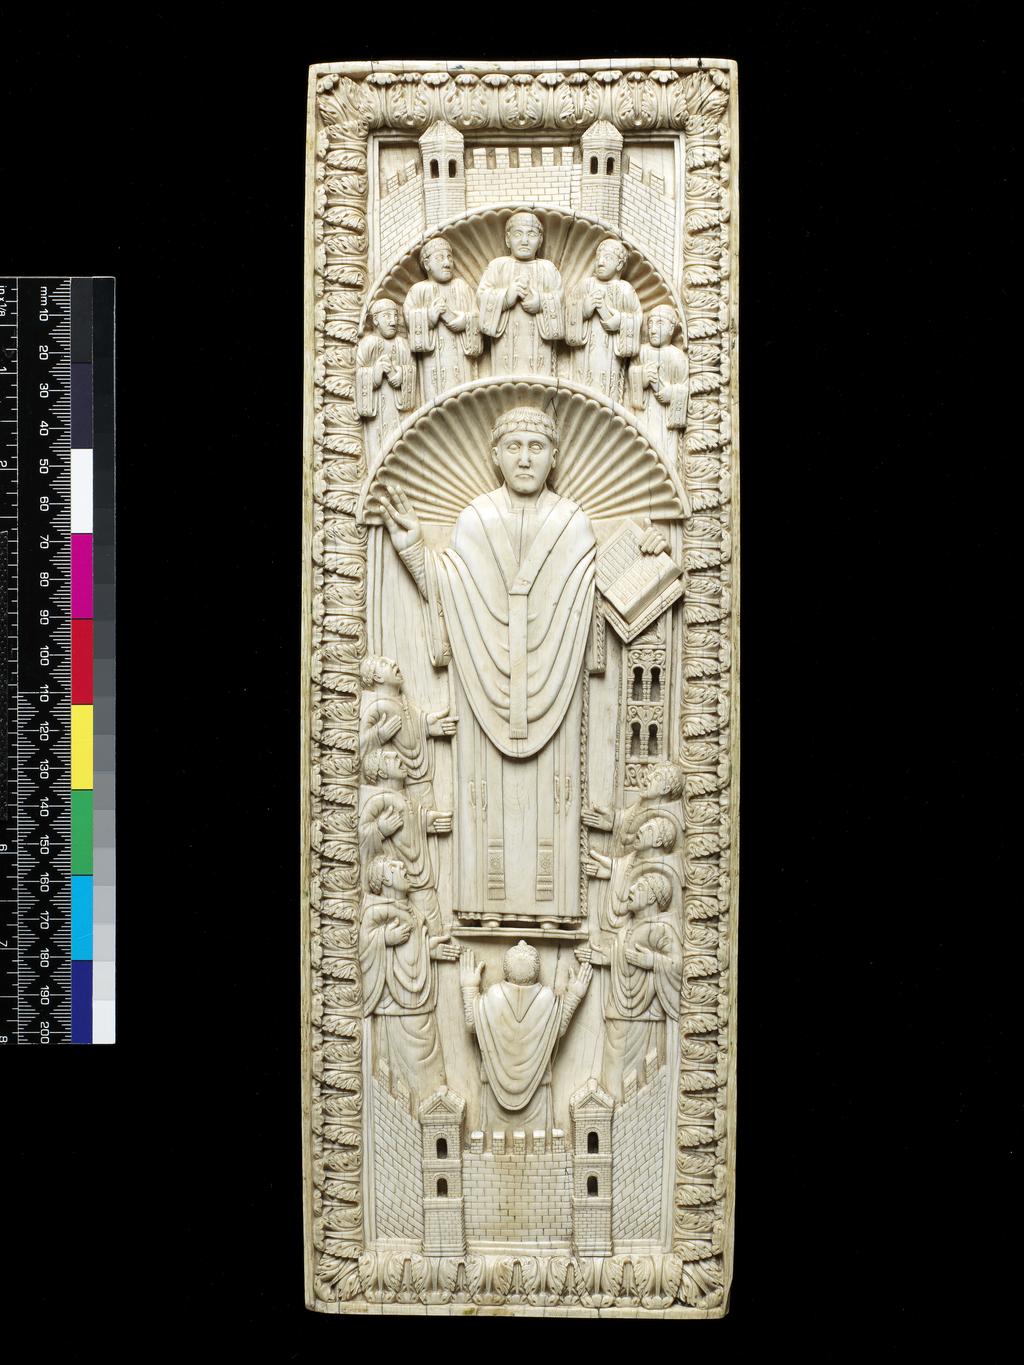 An image of Sculpture. An Archbishop among his Choir. Ivory, carved, height (whole) 33.7 cm, width (whole) 11.4 cm, depth (whole) 1.2 cm, circa 950 to 1000. Unknown, maker, probably, Lotharingia.